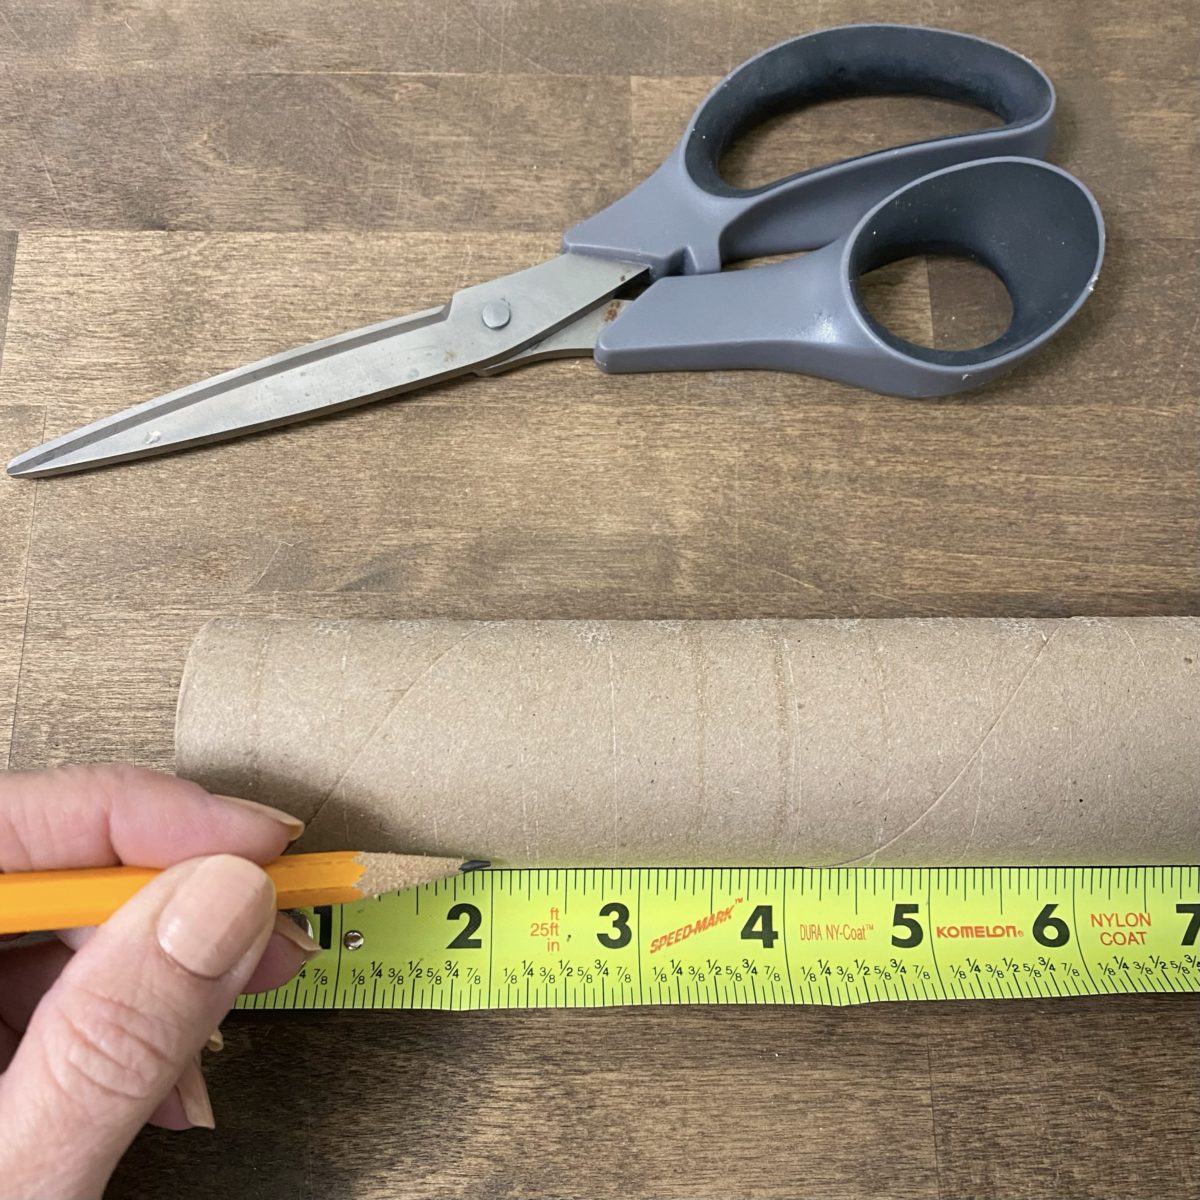 Measuring out 2-inch lengths on the cardboard roll and marking them with a pencil.